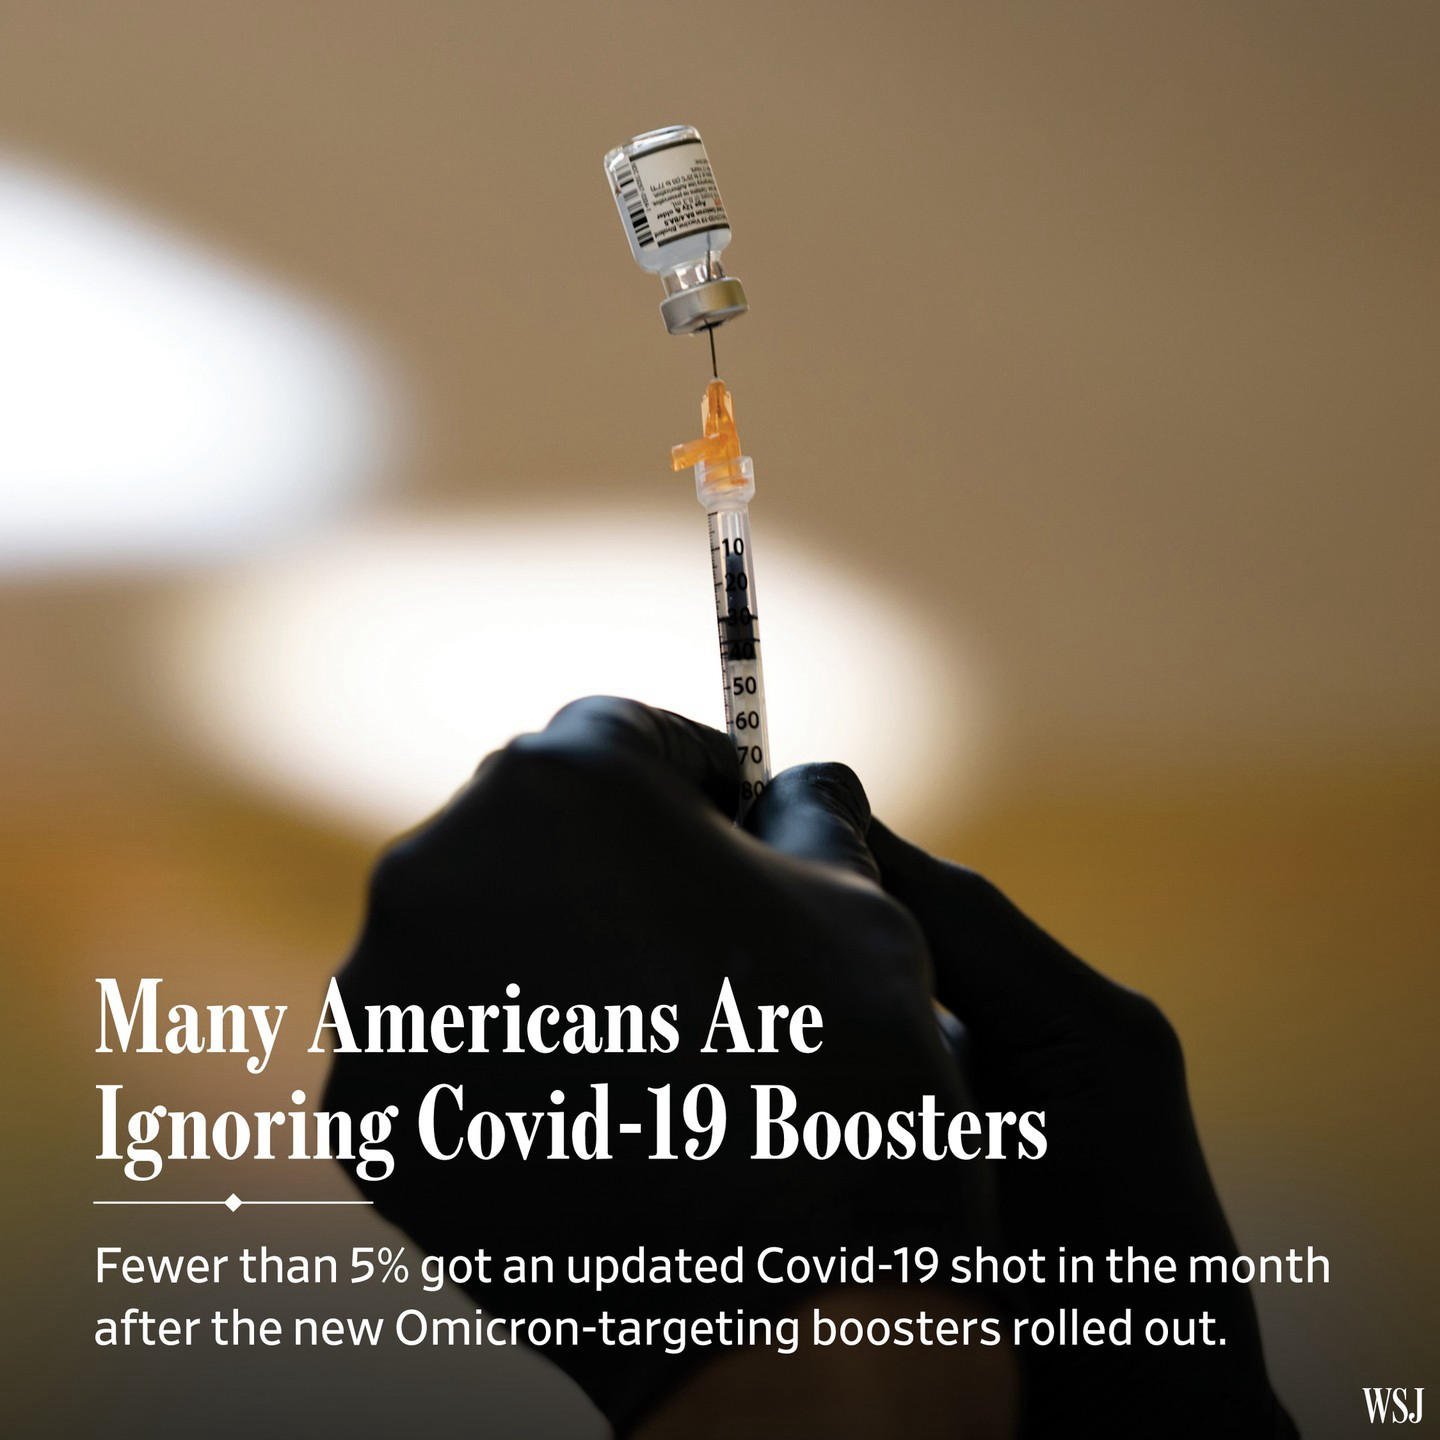 The Wall Street Journal - Fewer than 5% of Americans got an updated Covid-19 shot in the month after